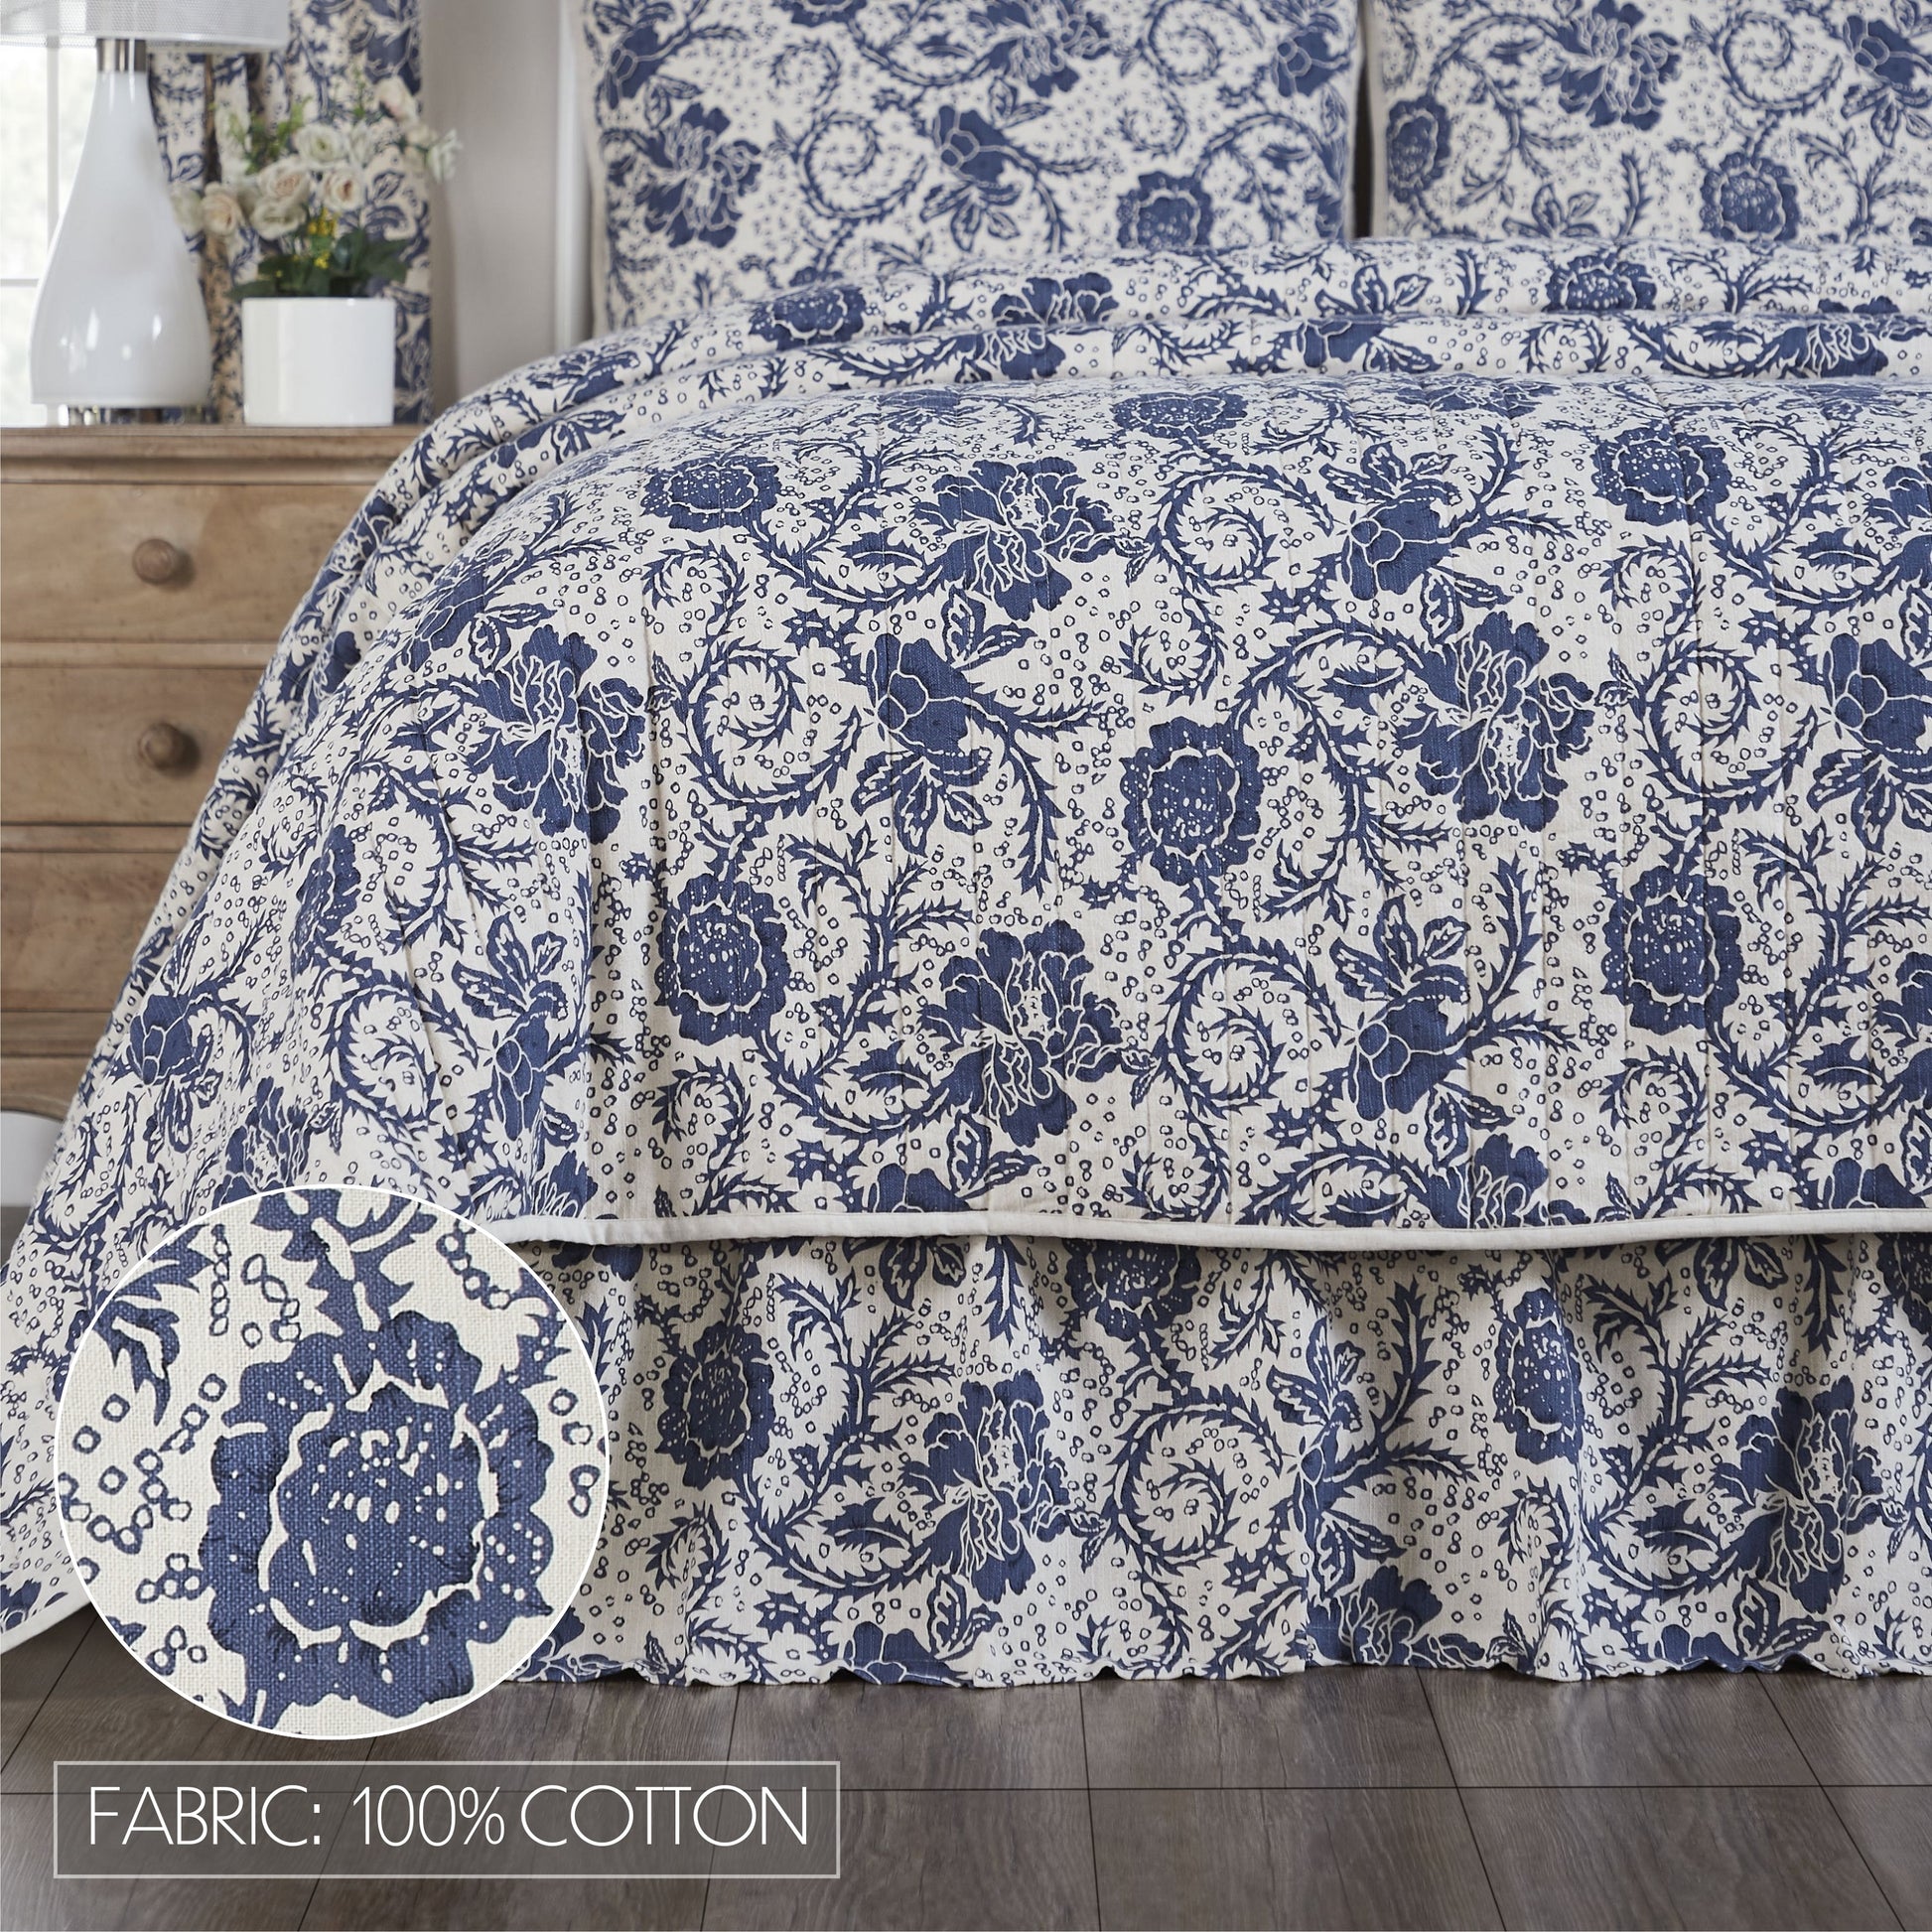 81241-Dorset-Navy-Floral-Twin-Bed-Skirt-39x76x16-image-2